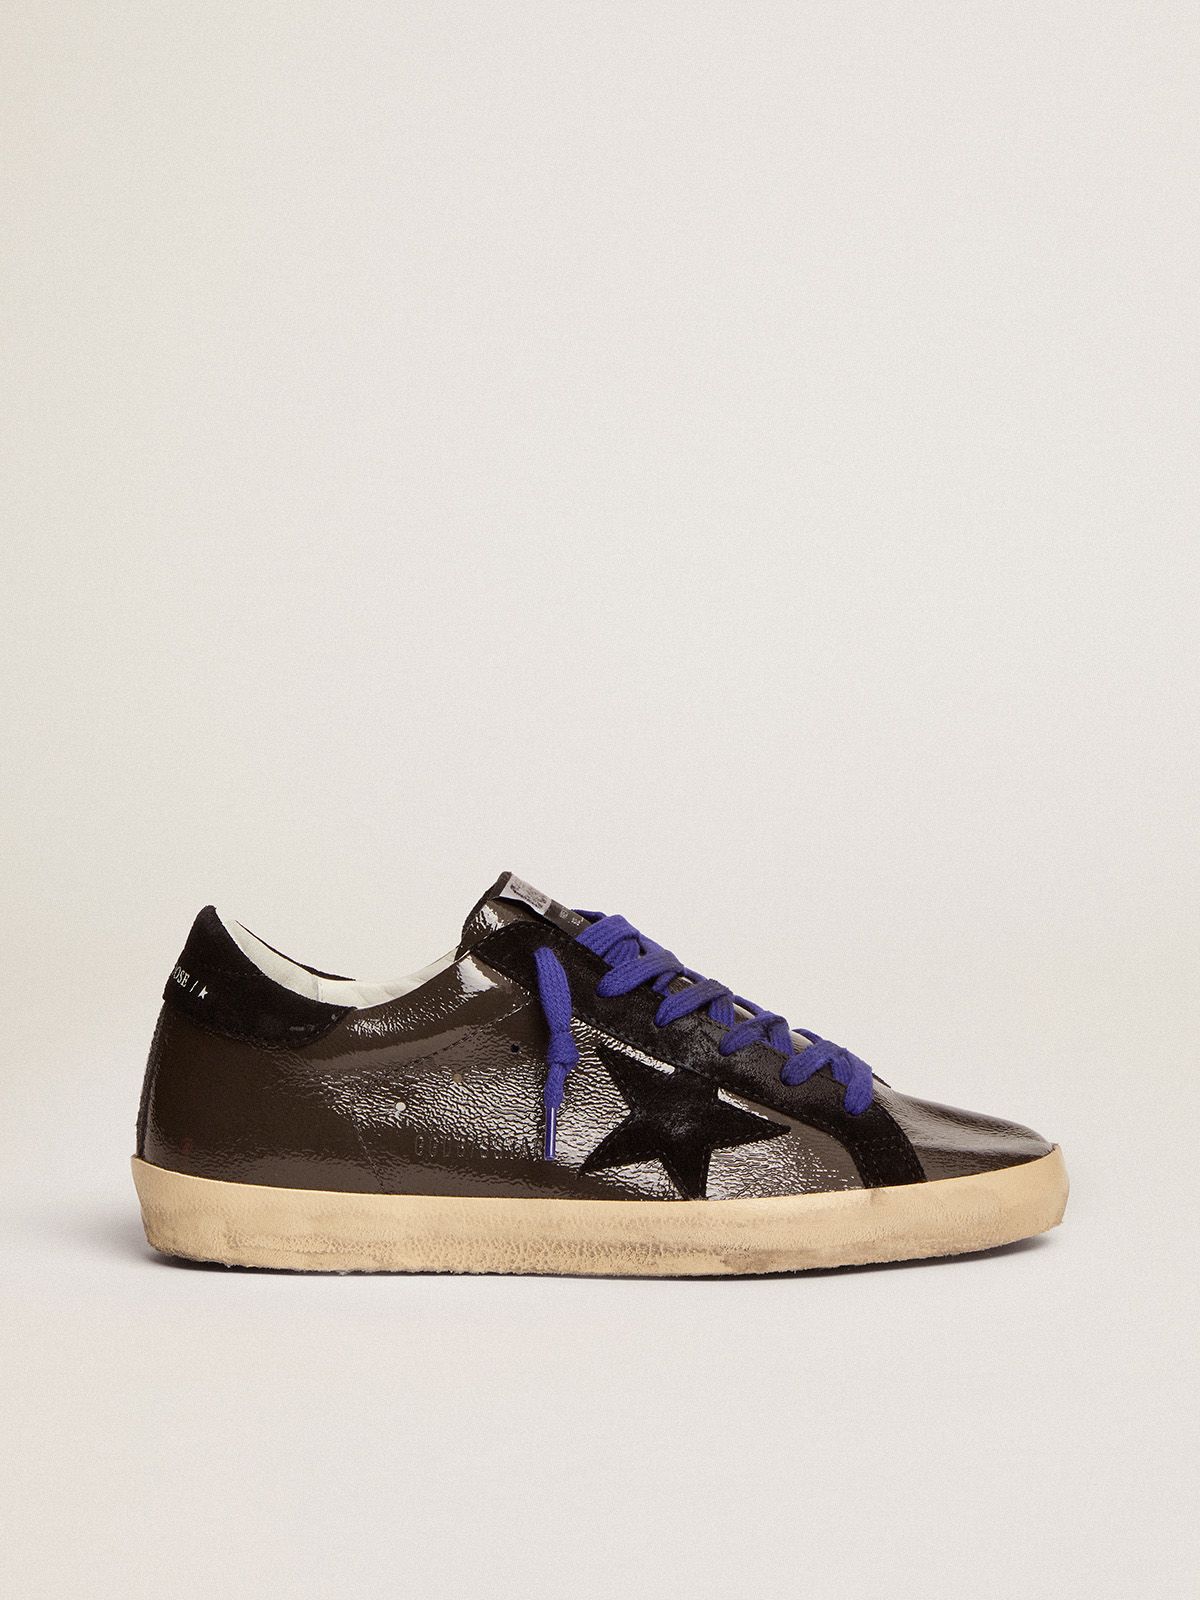 golden goose Super-Star suede with patent sneakers black in gray inserts leather